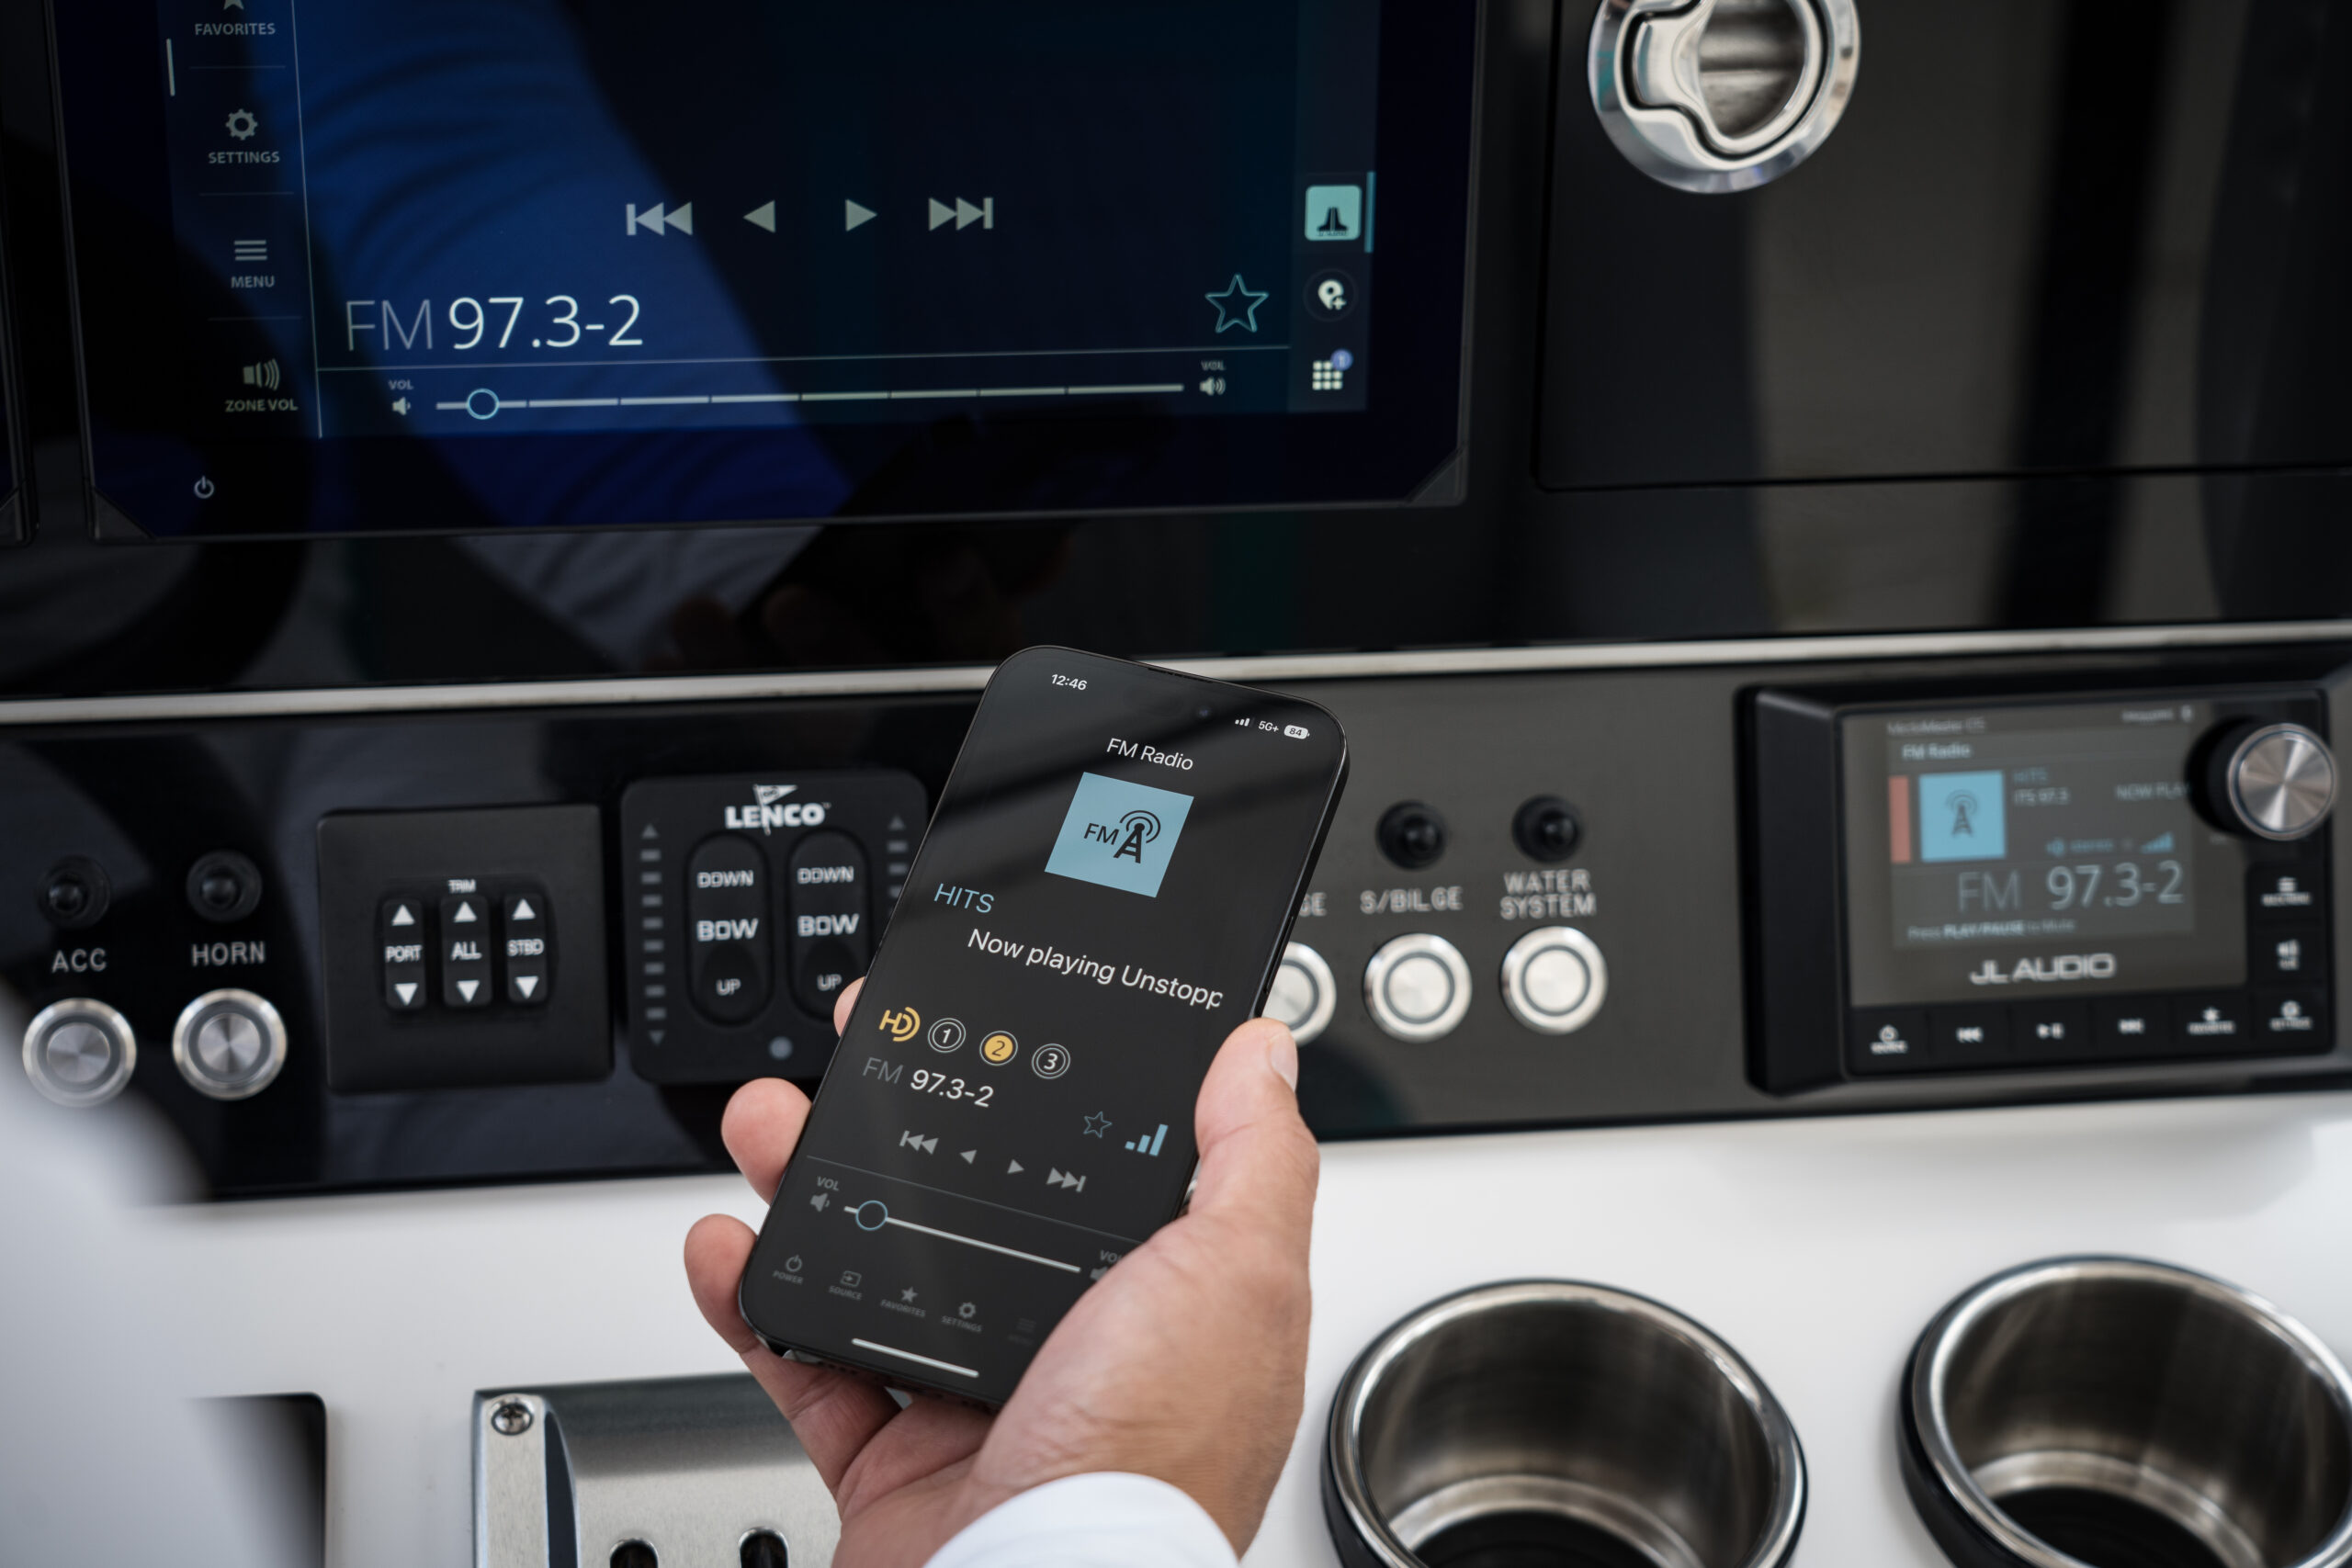 JL Audio Launches MediaMaster® Remote App, Enabling Remote System Control from most Mobile Devices